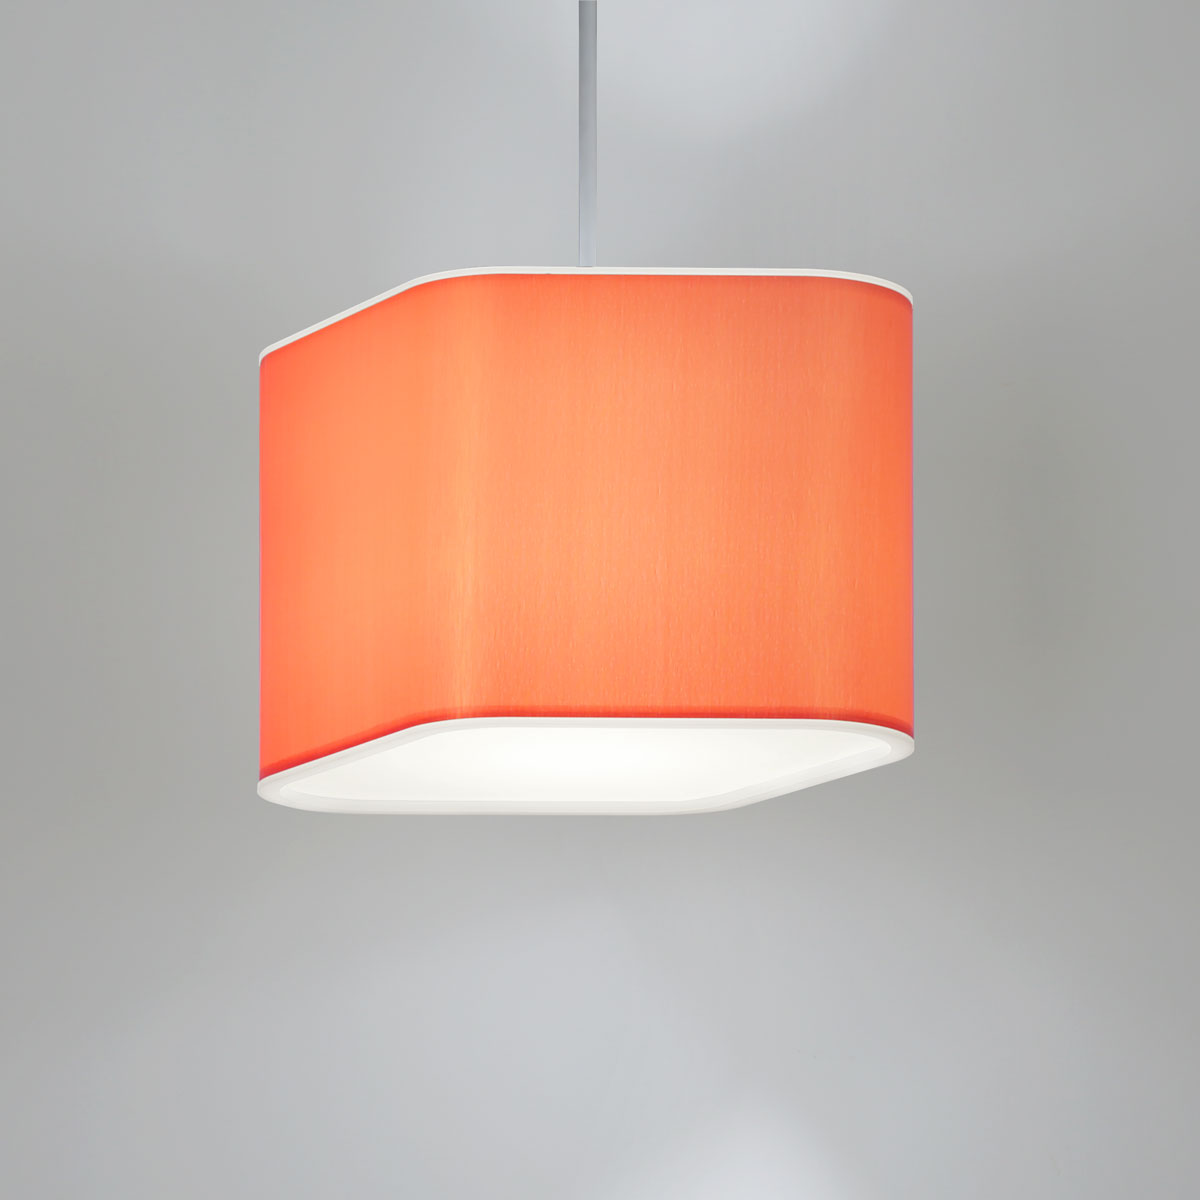 Stylish modern lighting with brilliant accent colors and distinctive geometric shapes; our Glow pendants offer modern elegance, perfect ambient illumination, and a flair for contemporary charm.